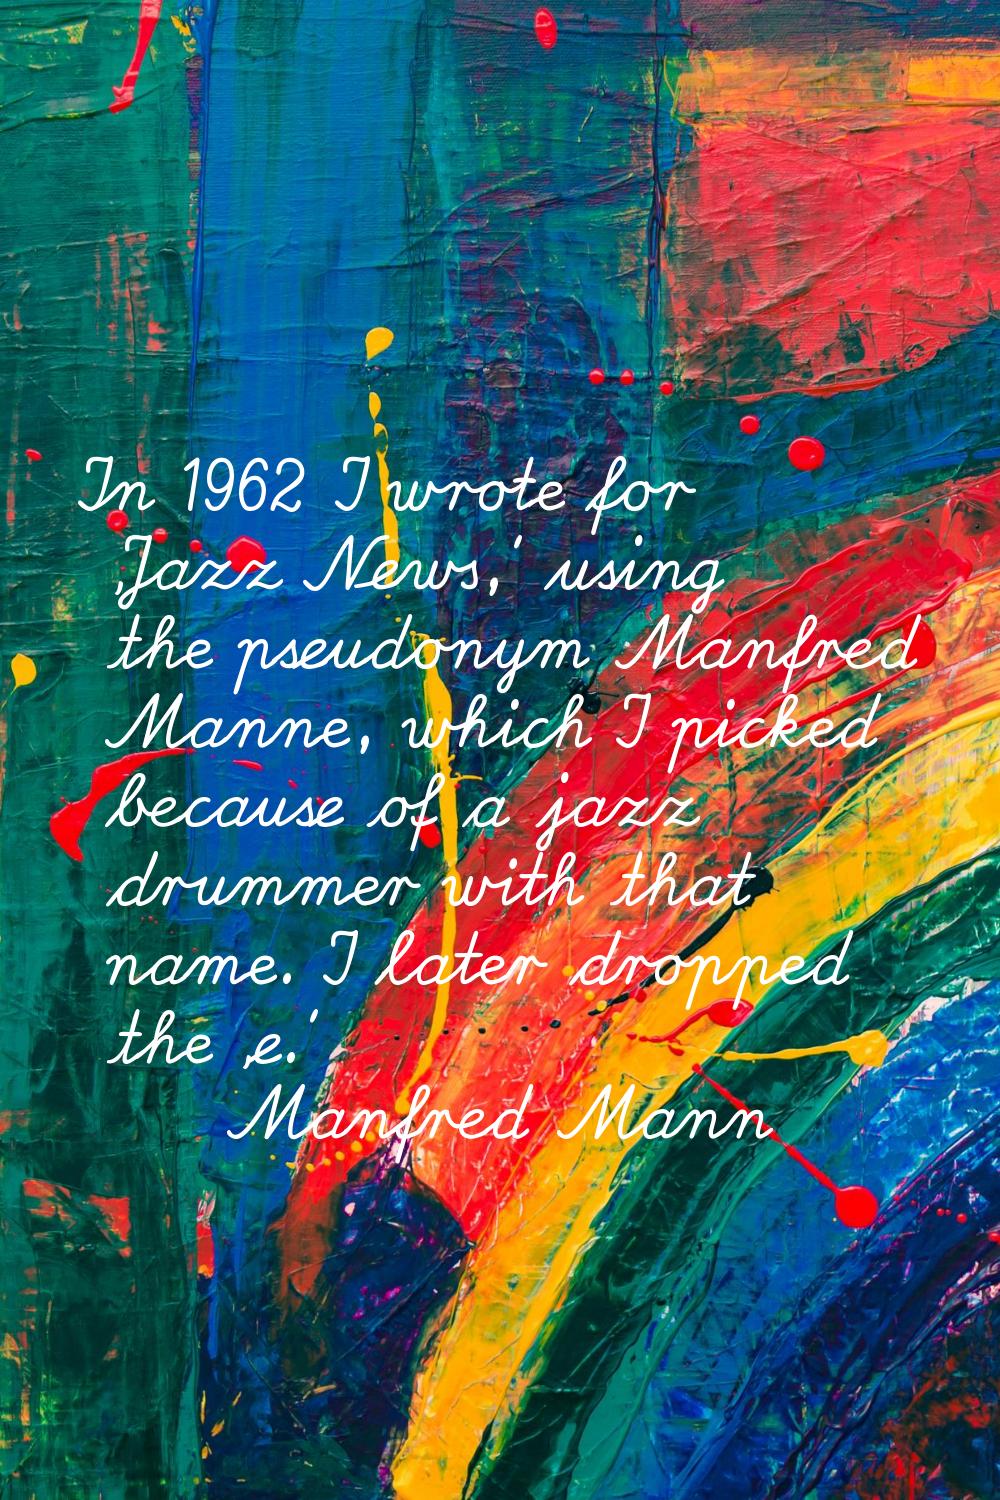 In 1962 I wrote for 'Jazz News,' using the pseudonym Manfred Manne, which I picked because of a jaz